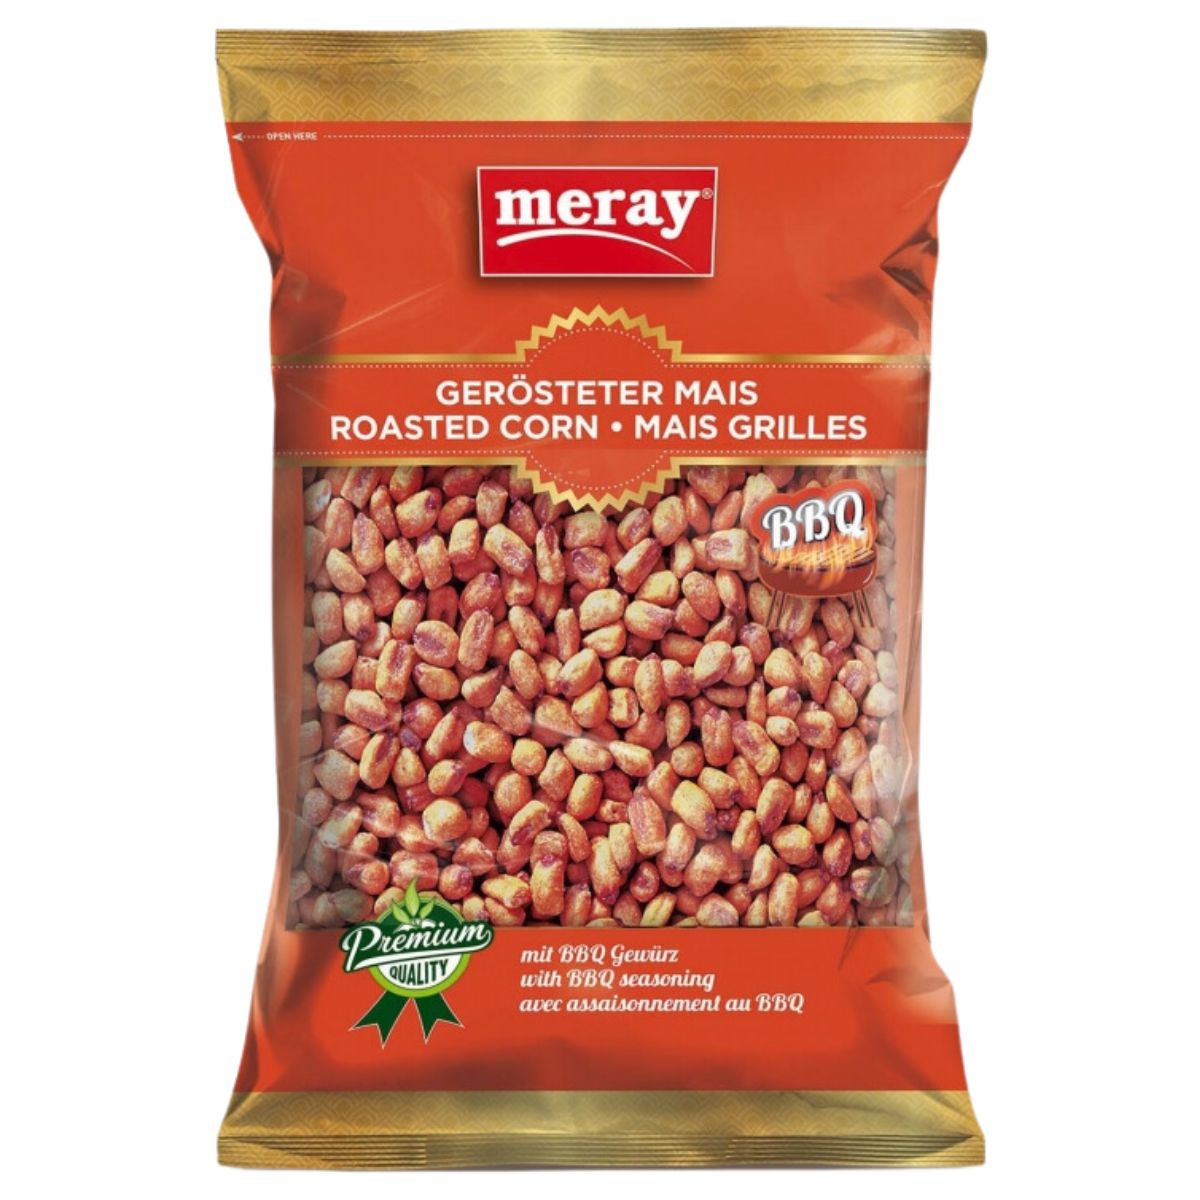 Meray - Roasted Corn BBQ - 150g in a bag.